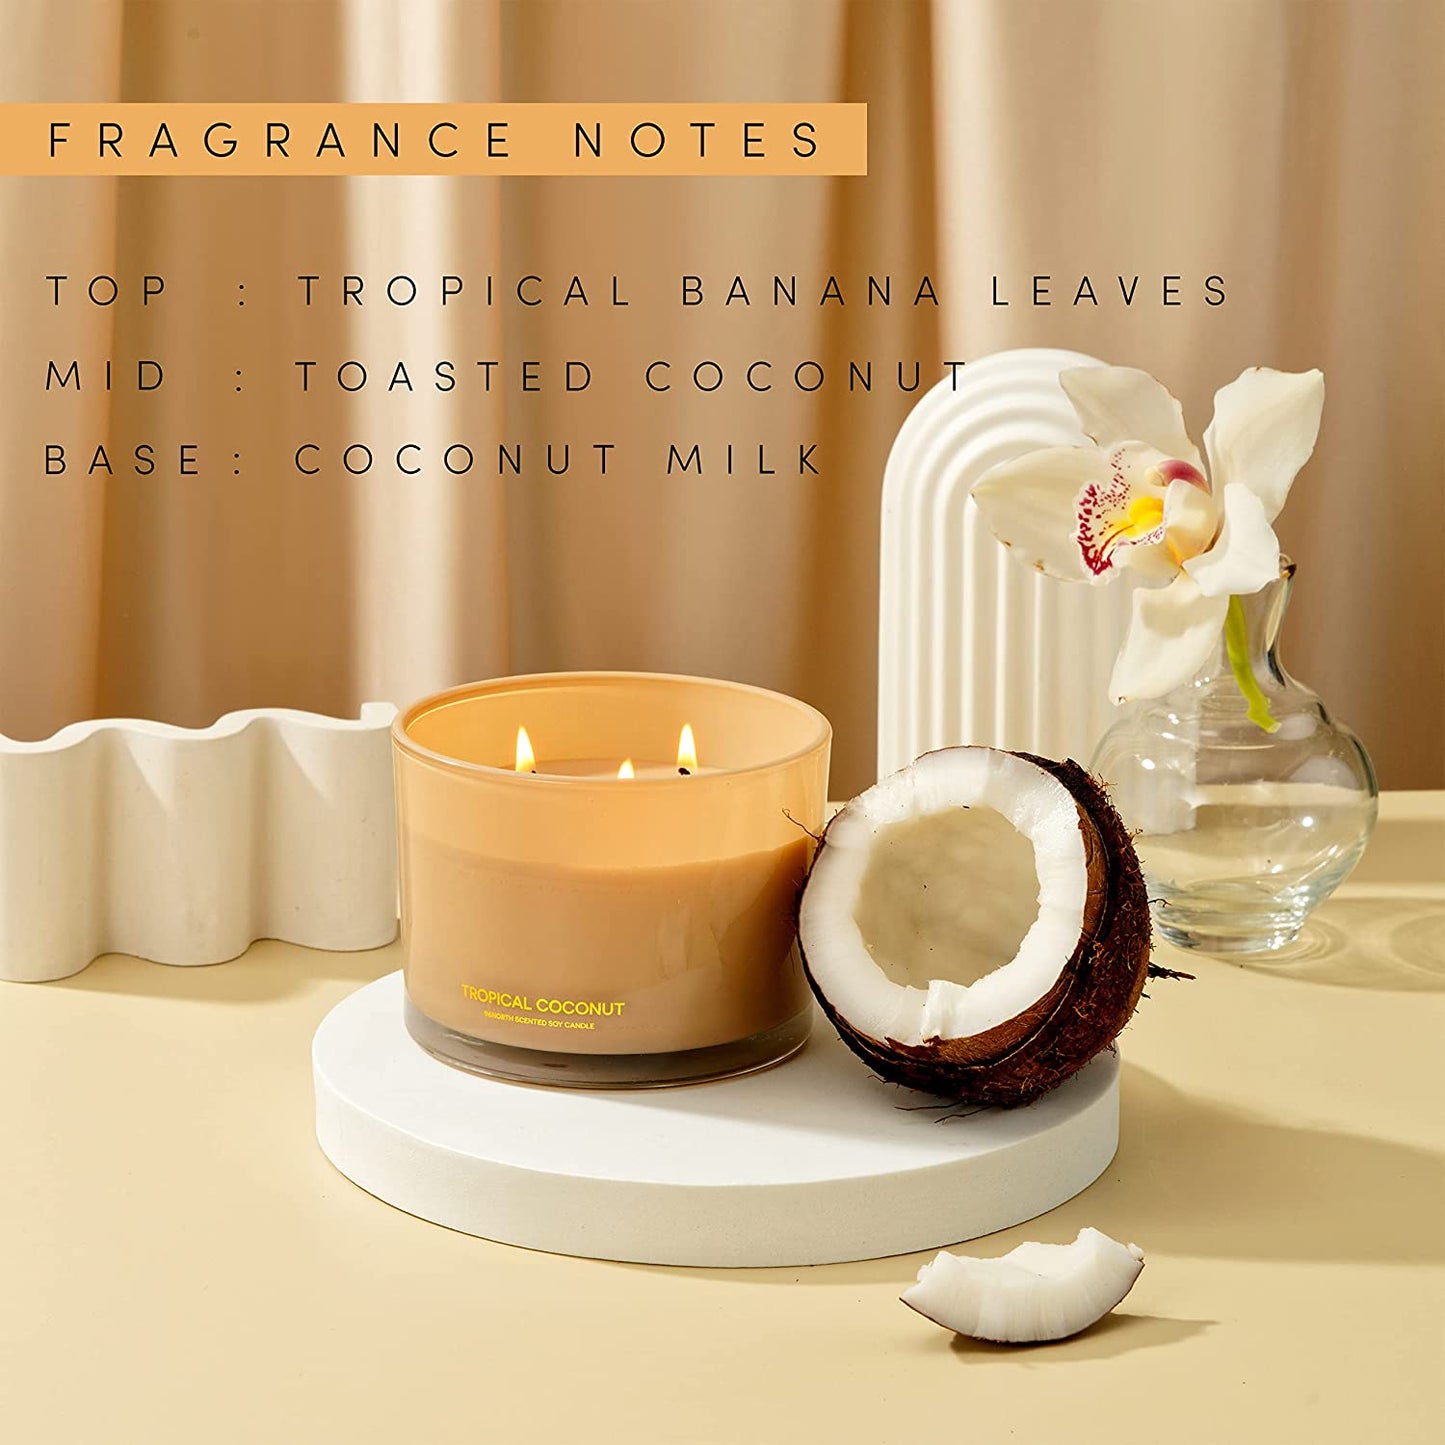 Luxury Coconut Soy Candle | Large 3 Wick Jar Candle | up to 50 Hours Burning Time | Tropical Beach Scented Candles for Home | 100% Natural Soy Wax | Housewarming Gift for Women and Men